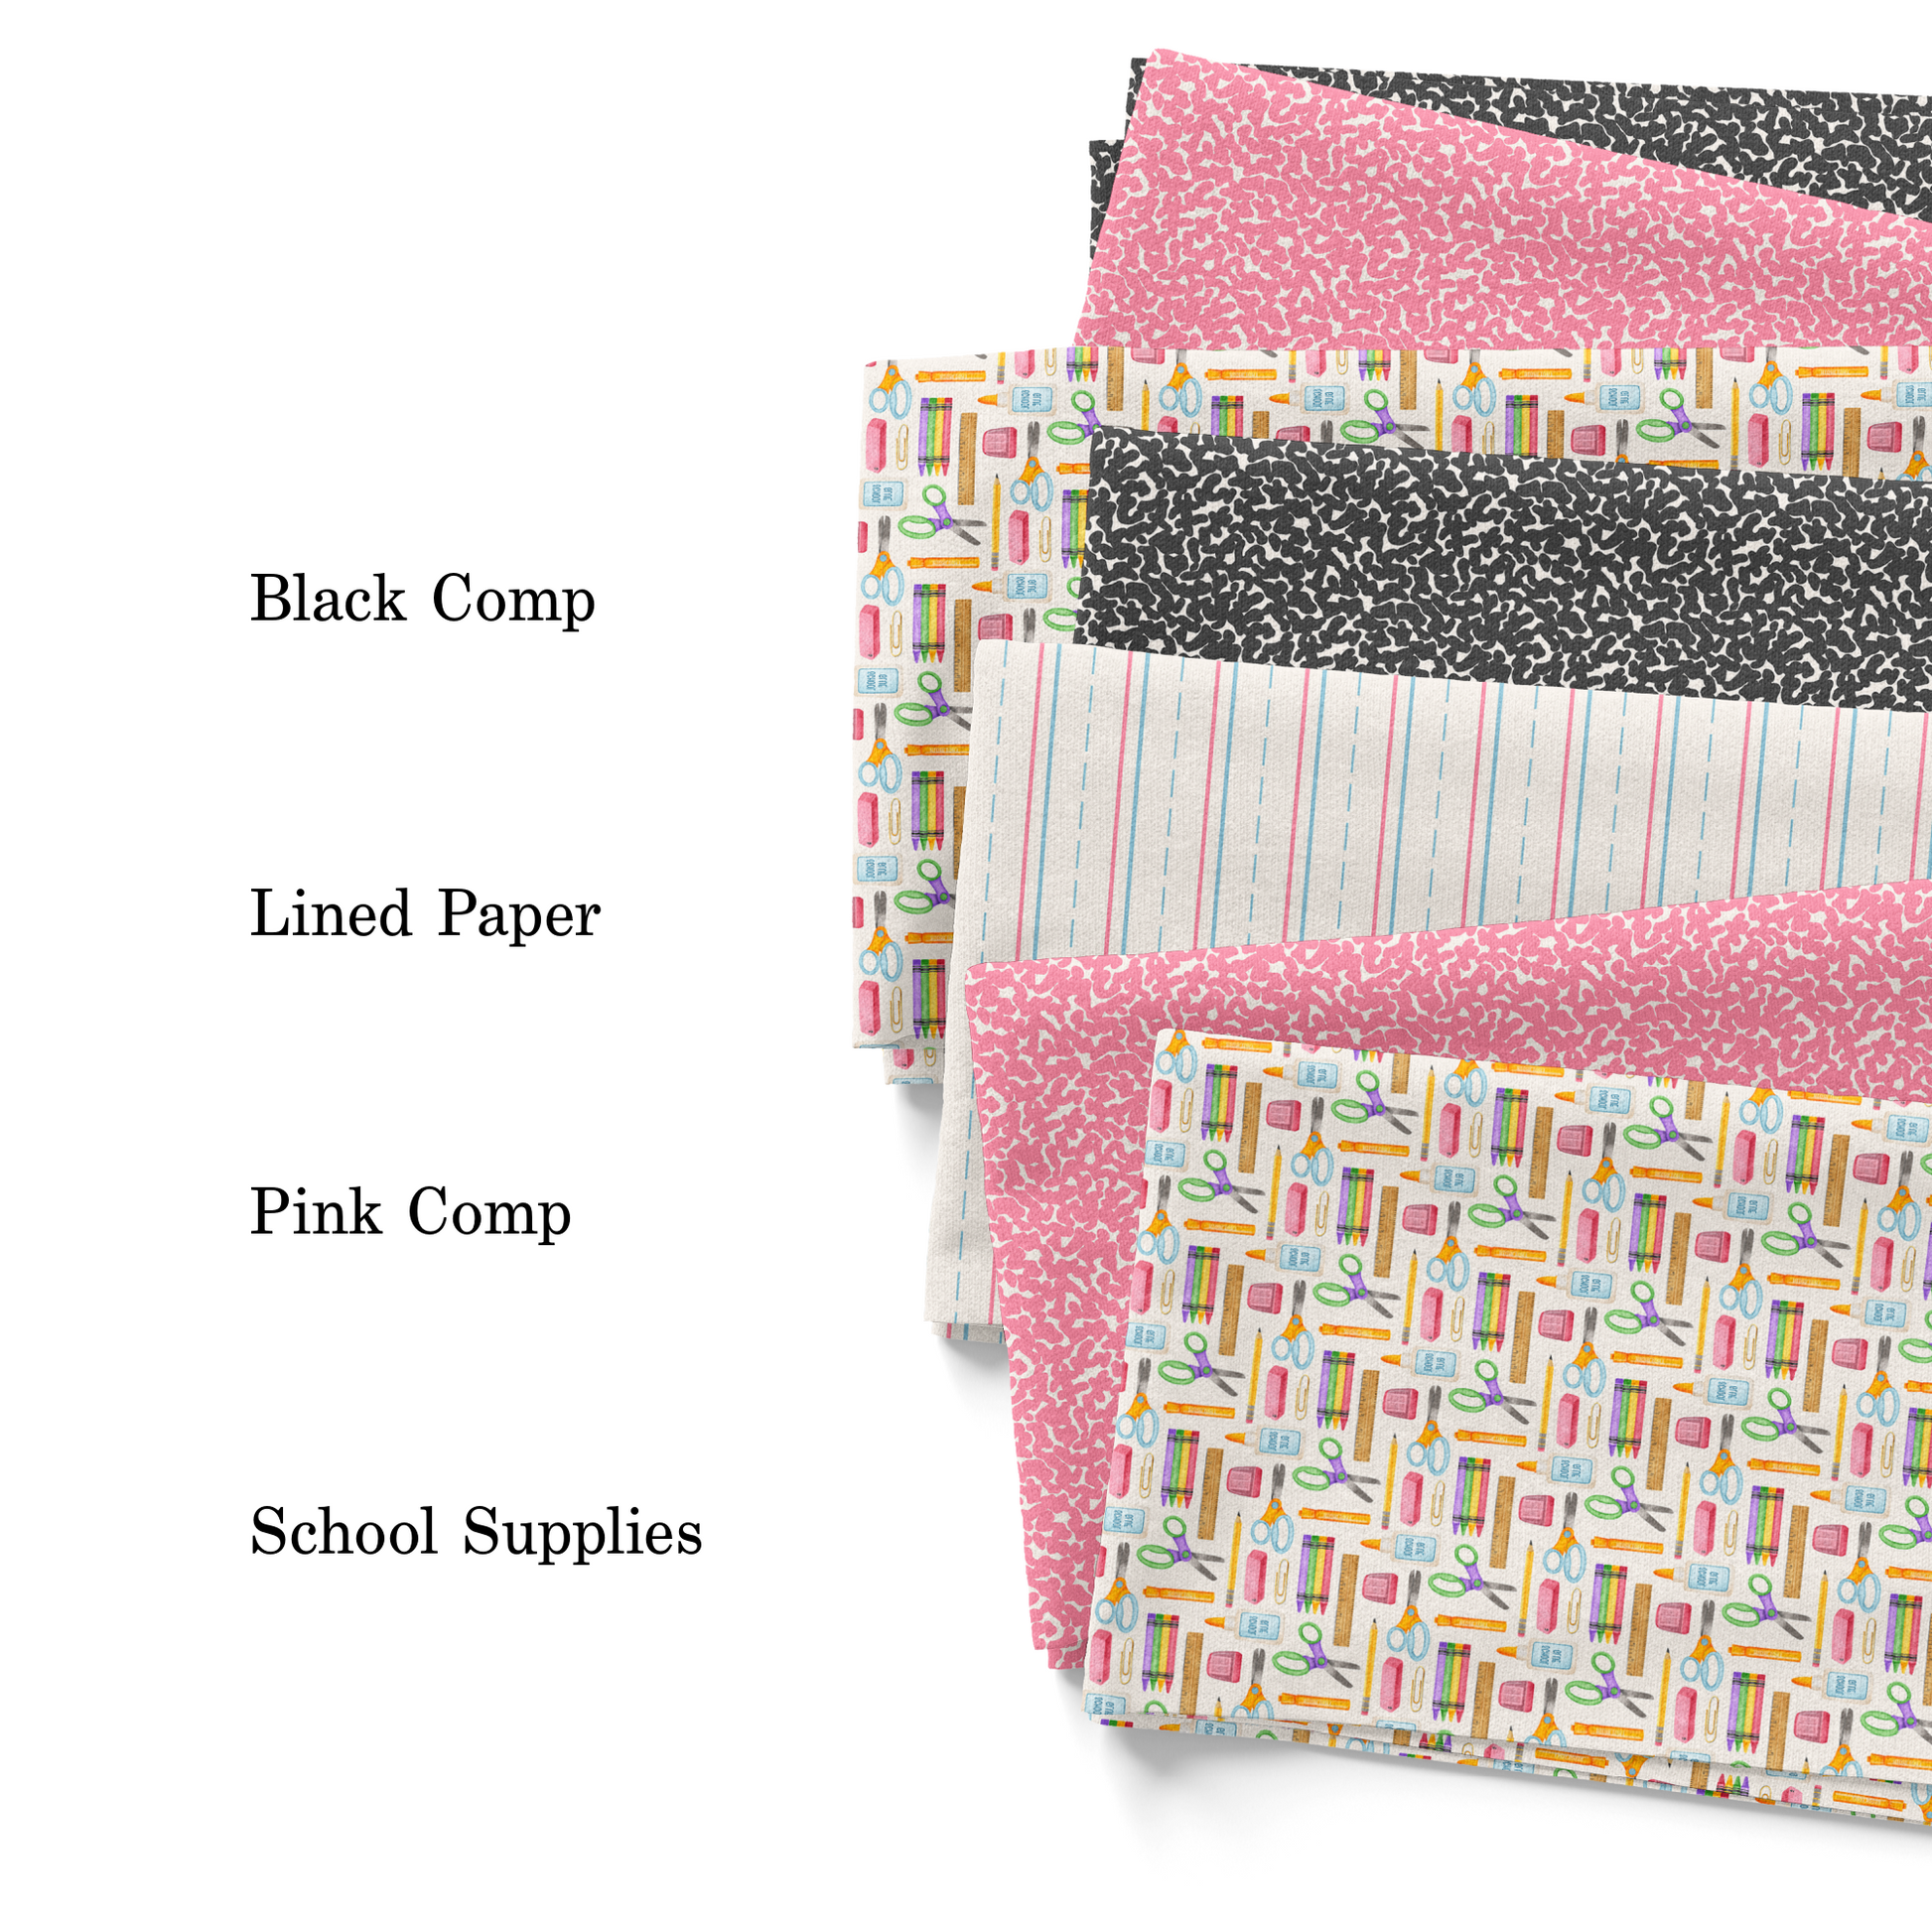 Premium Hi-Bloom Pink Hand Towel, Cotton Sold by at Home